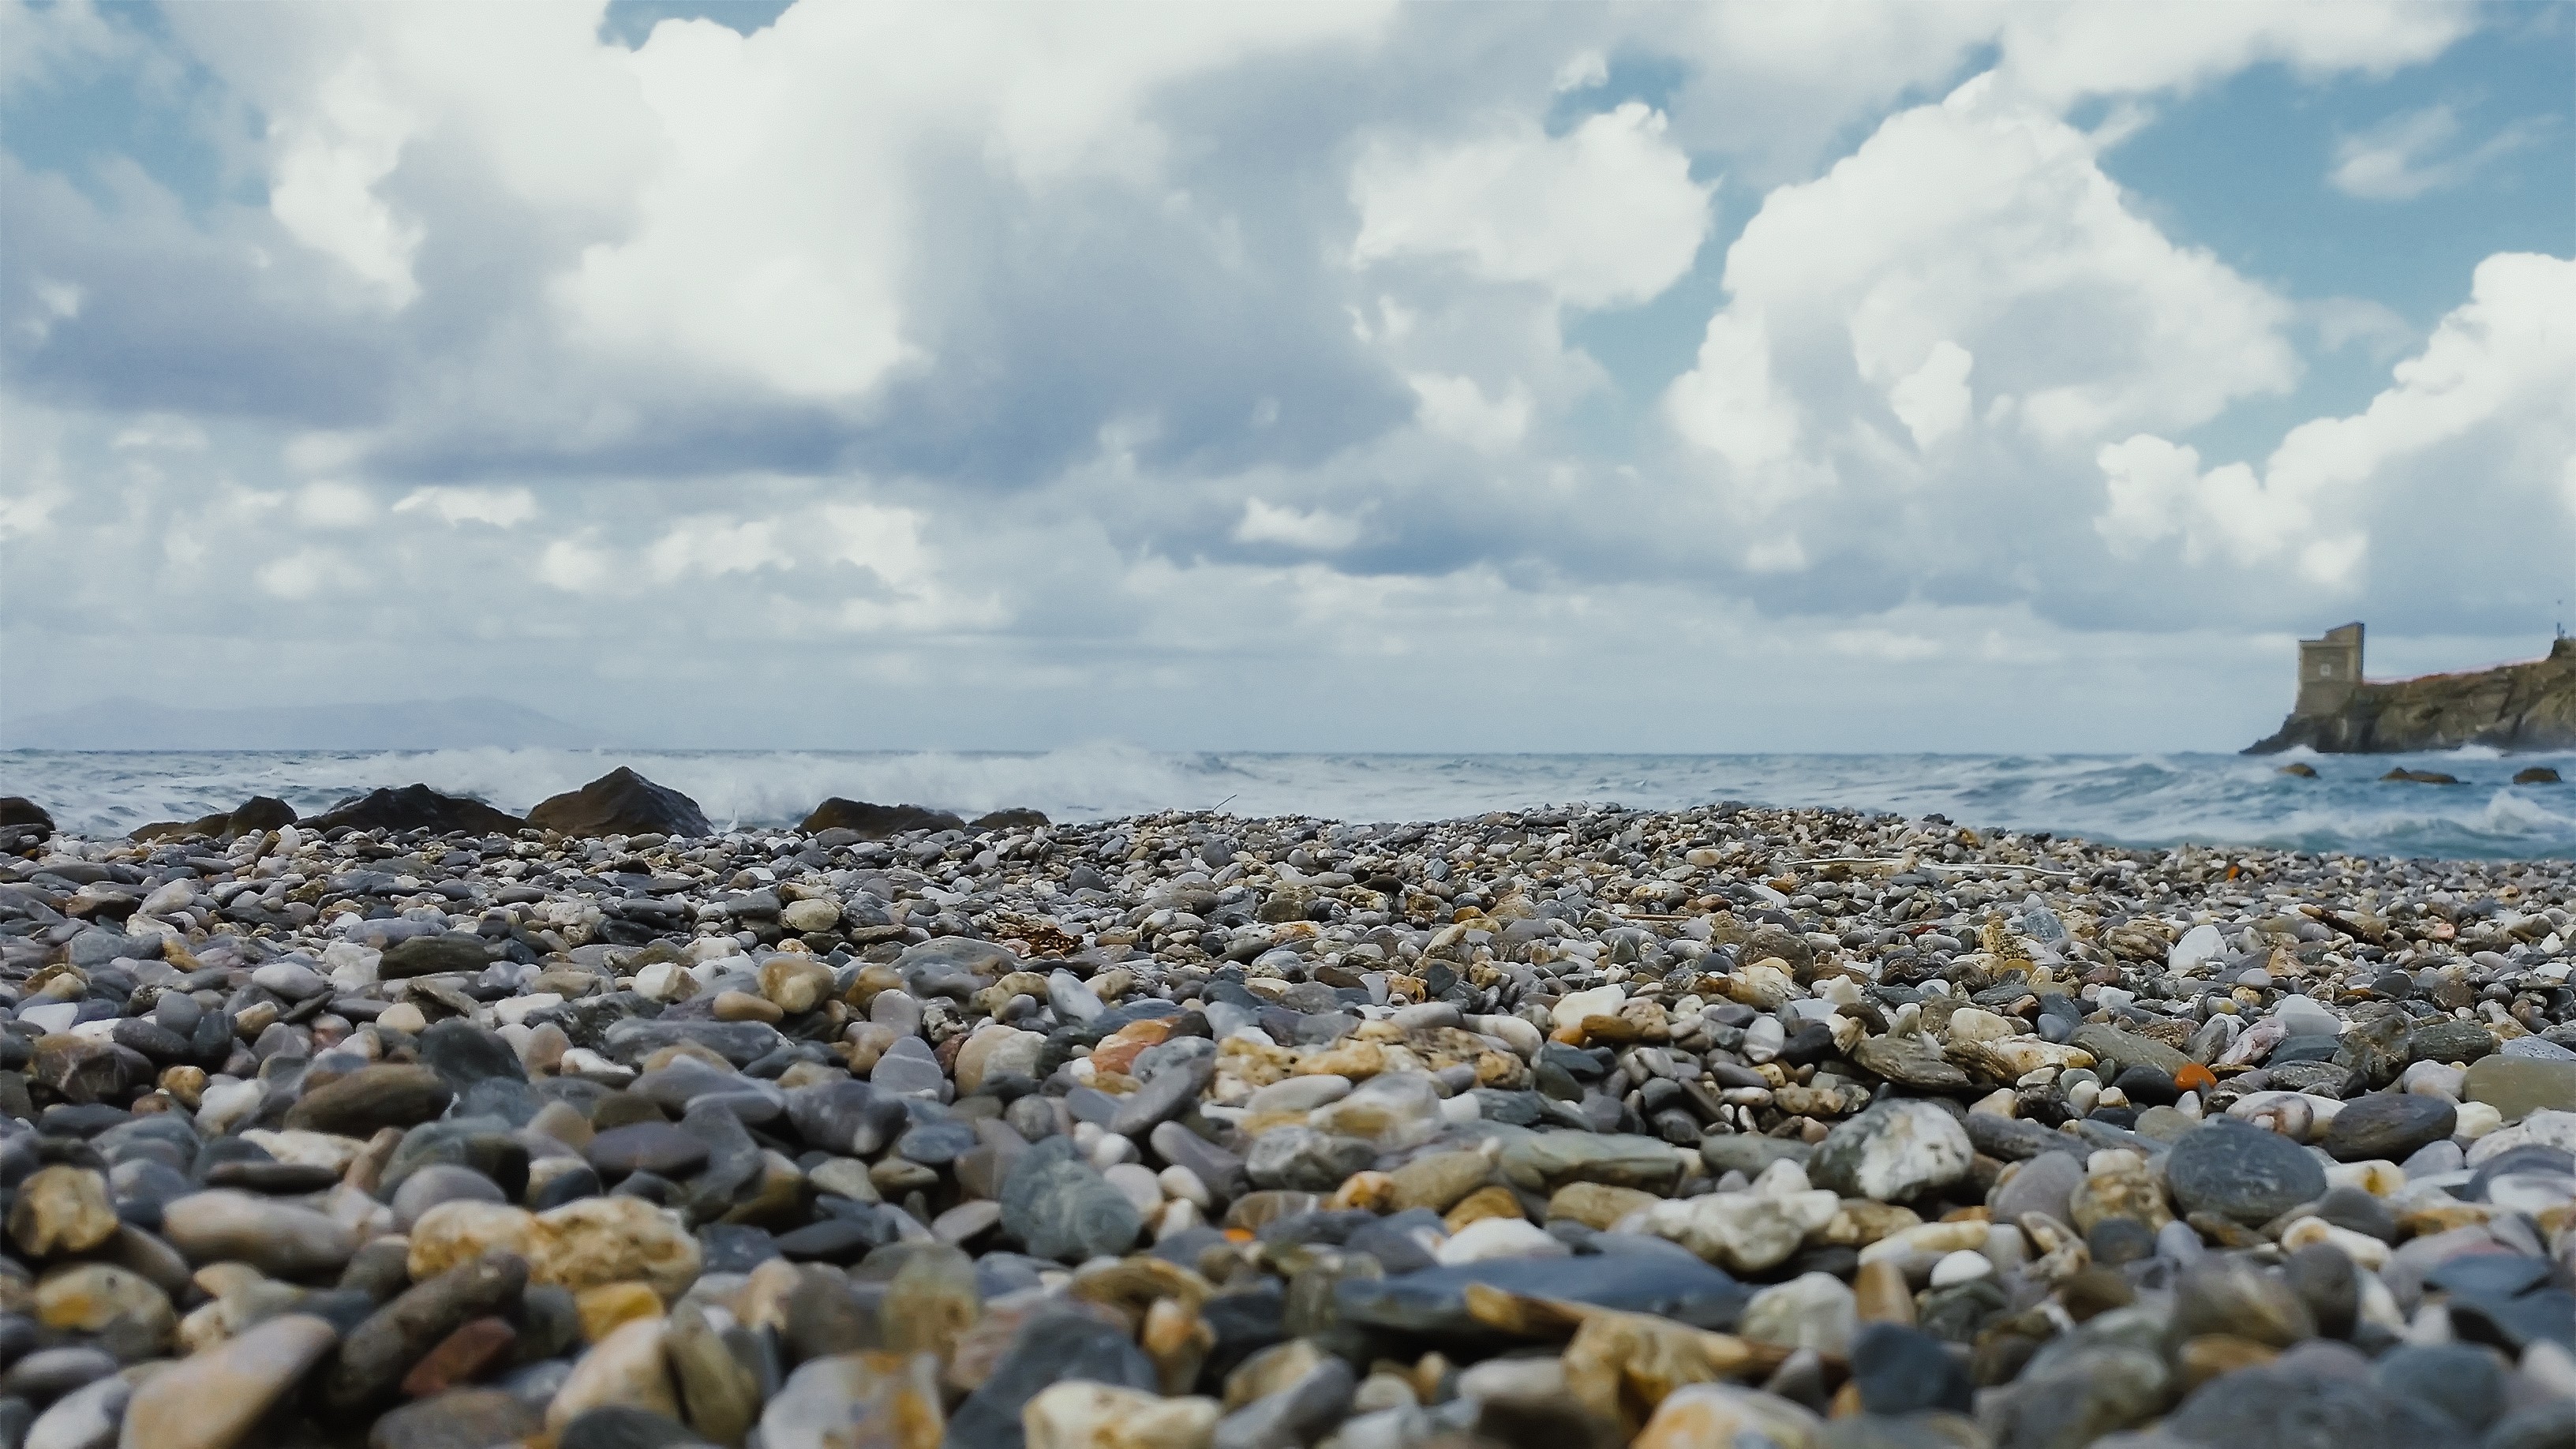 General 3264x1836 clouds water stones outdoors sea